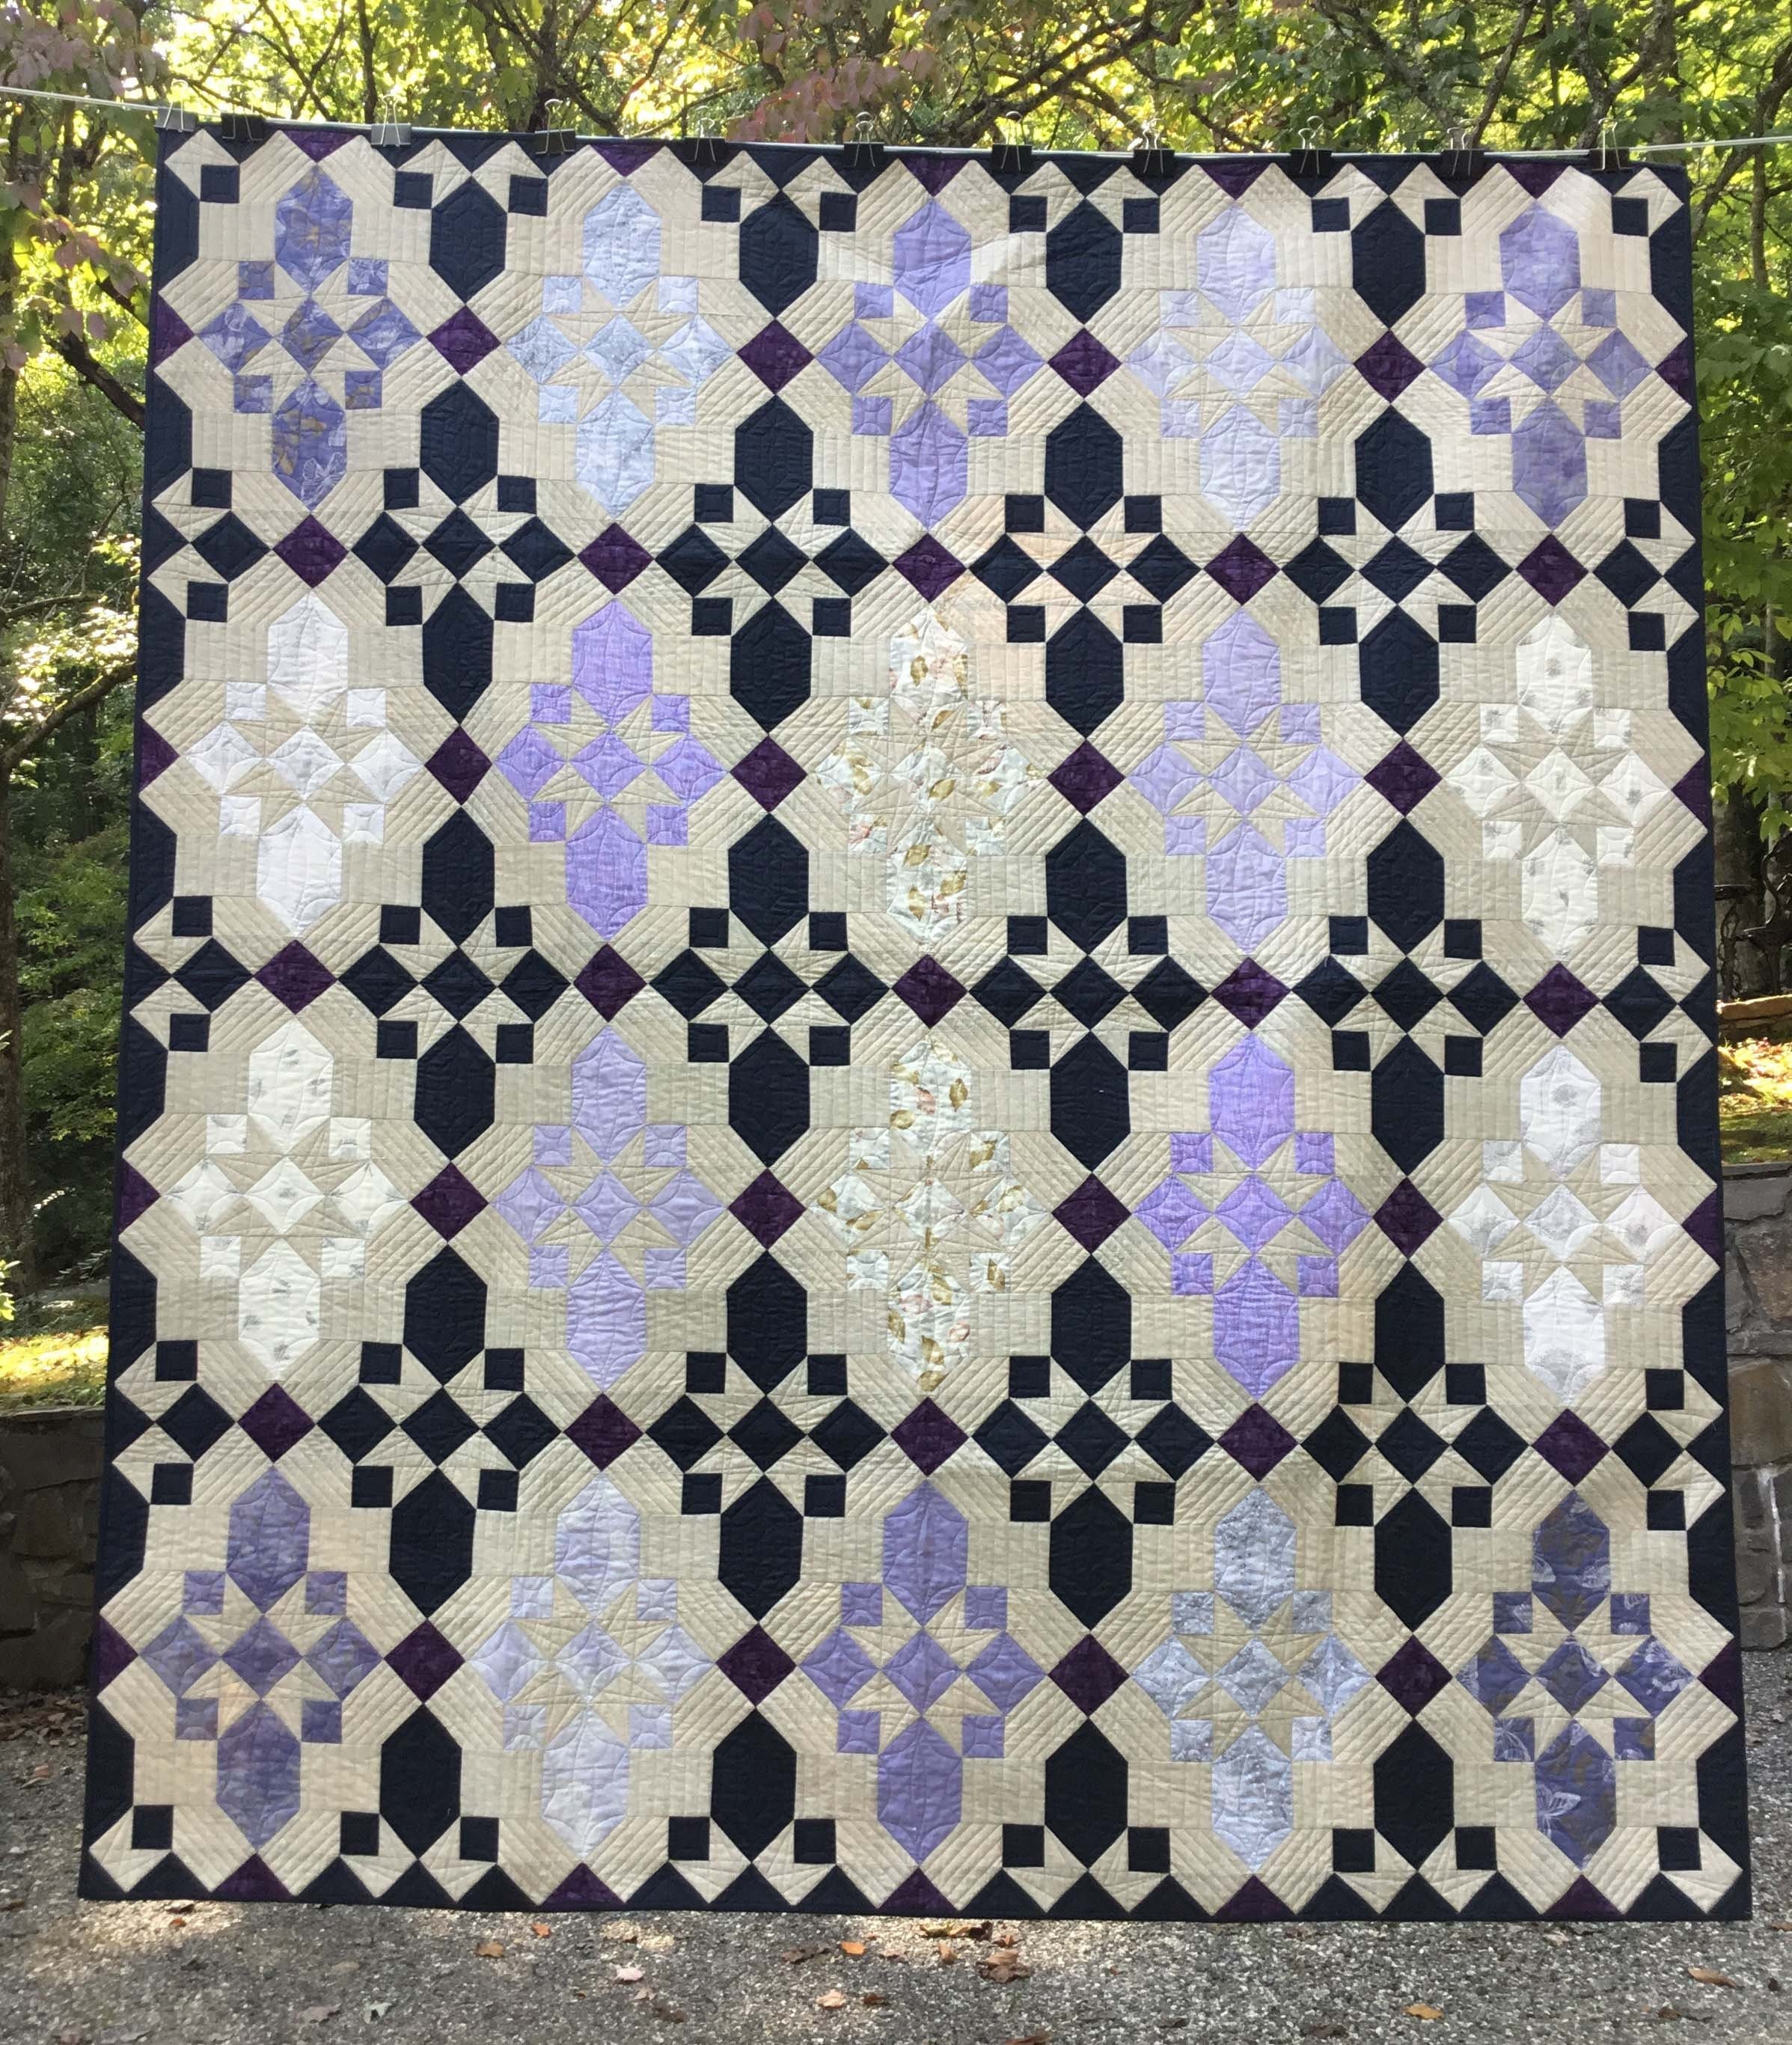 Lavender and navy quilt
Windows quilt
quilt for sale handmade homemade patchwork made in USA